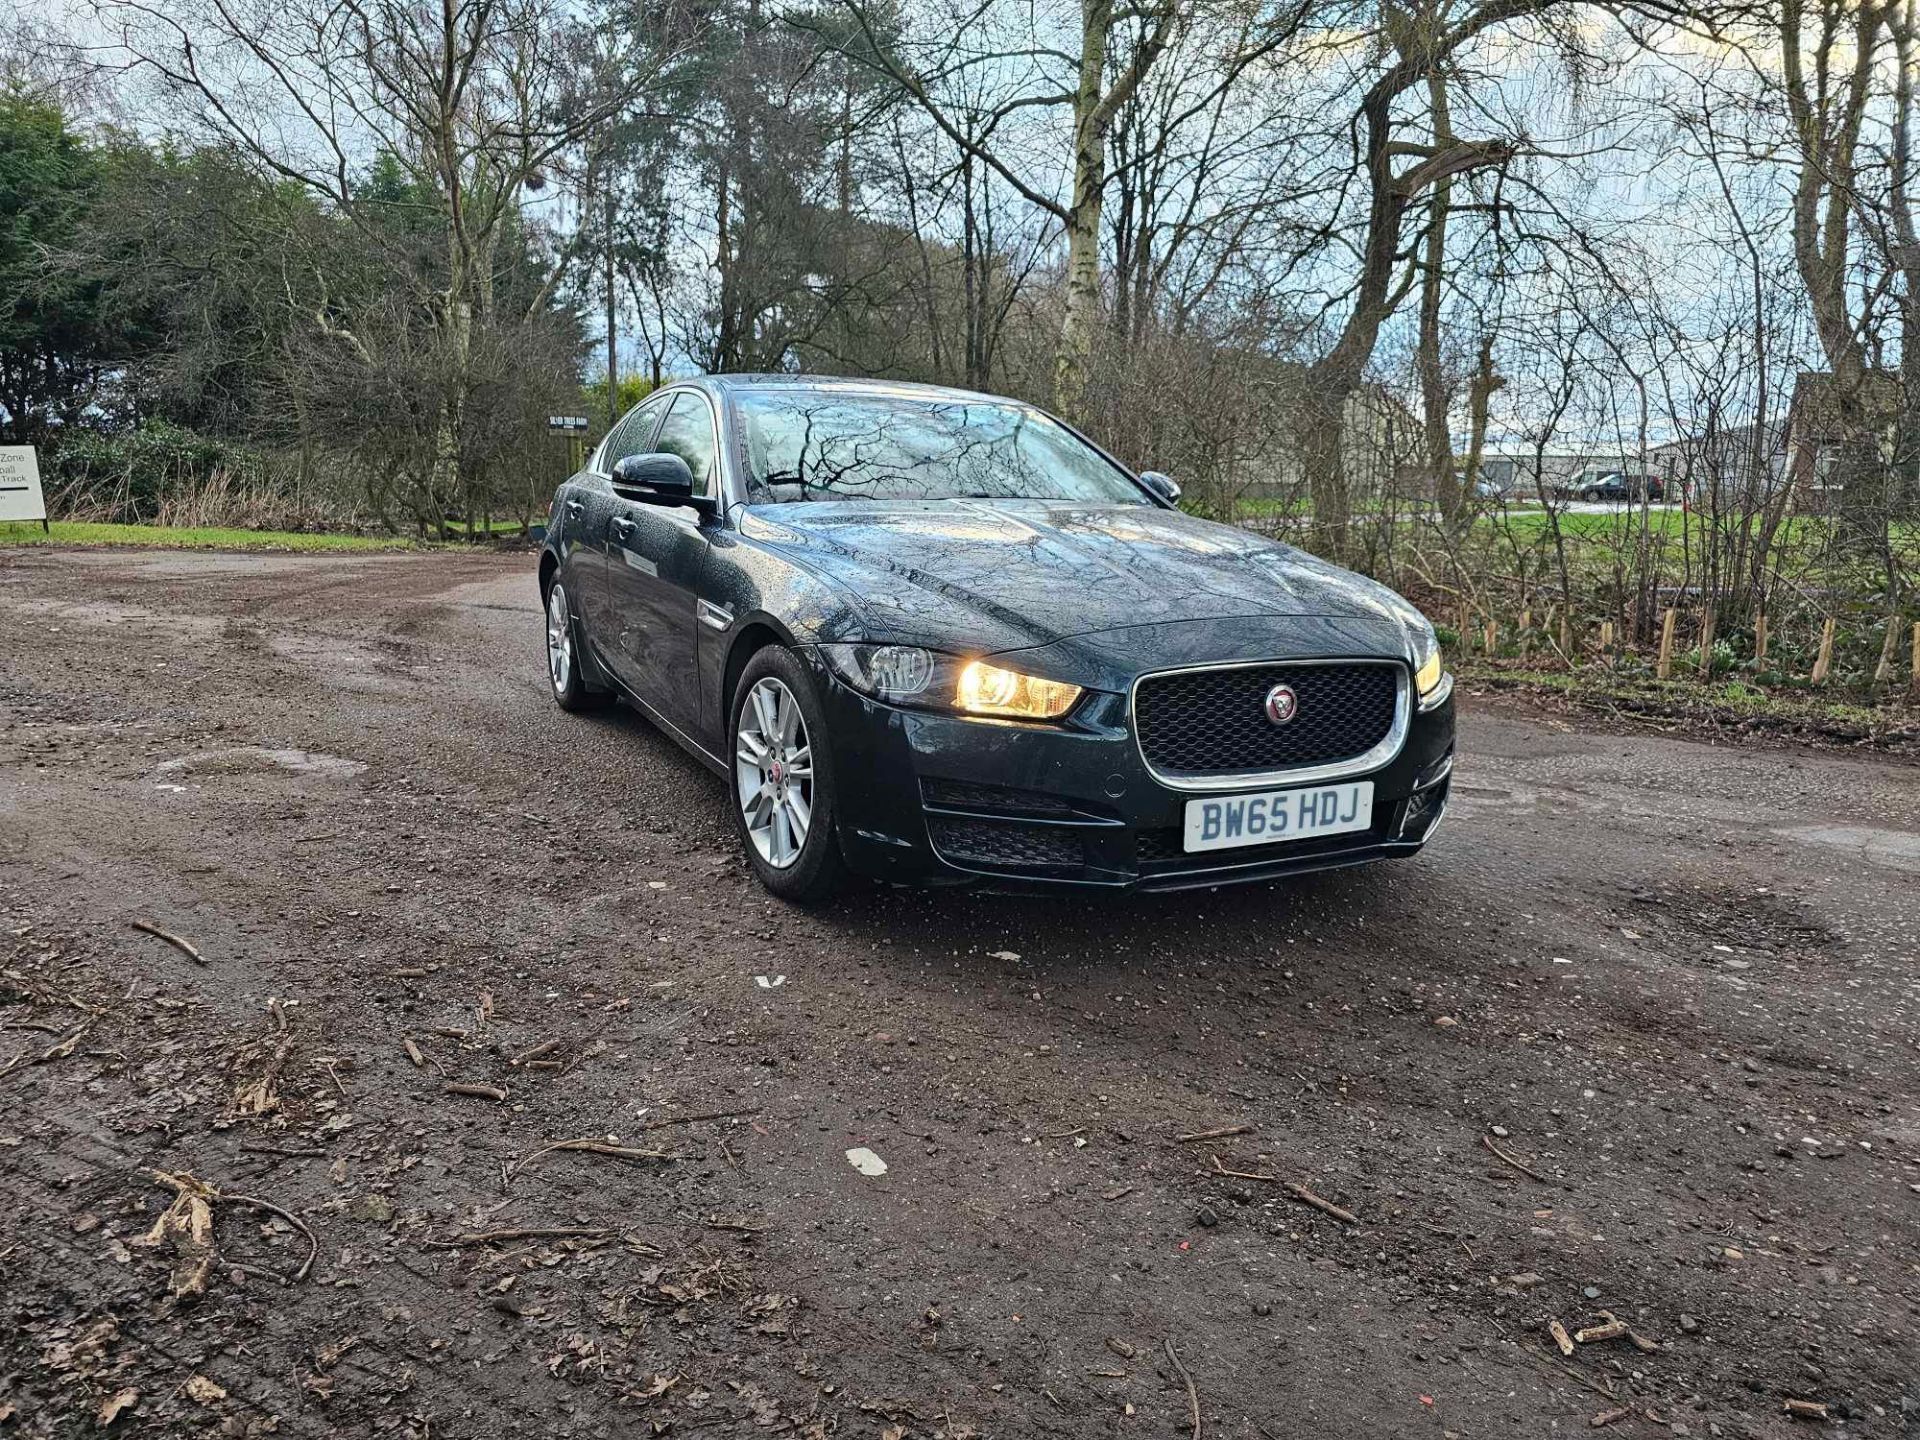 2015 65 JAGUAR XE SALOON - STARTS AND DRIVES BUT ENGINE IS NOISY - ALLOY WHEELS - 5 SERVICES. - Image 7 of 10